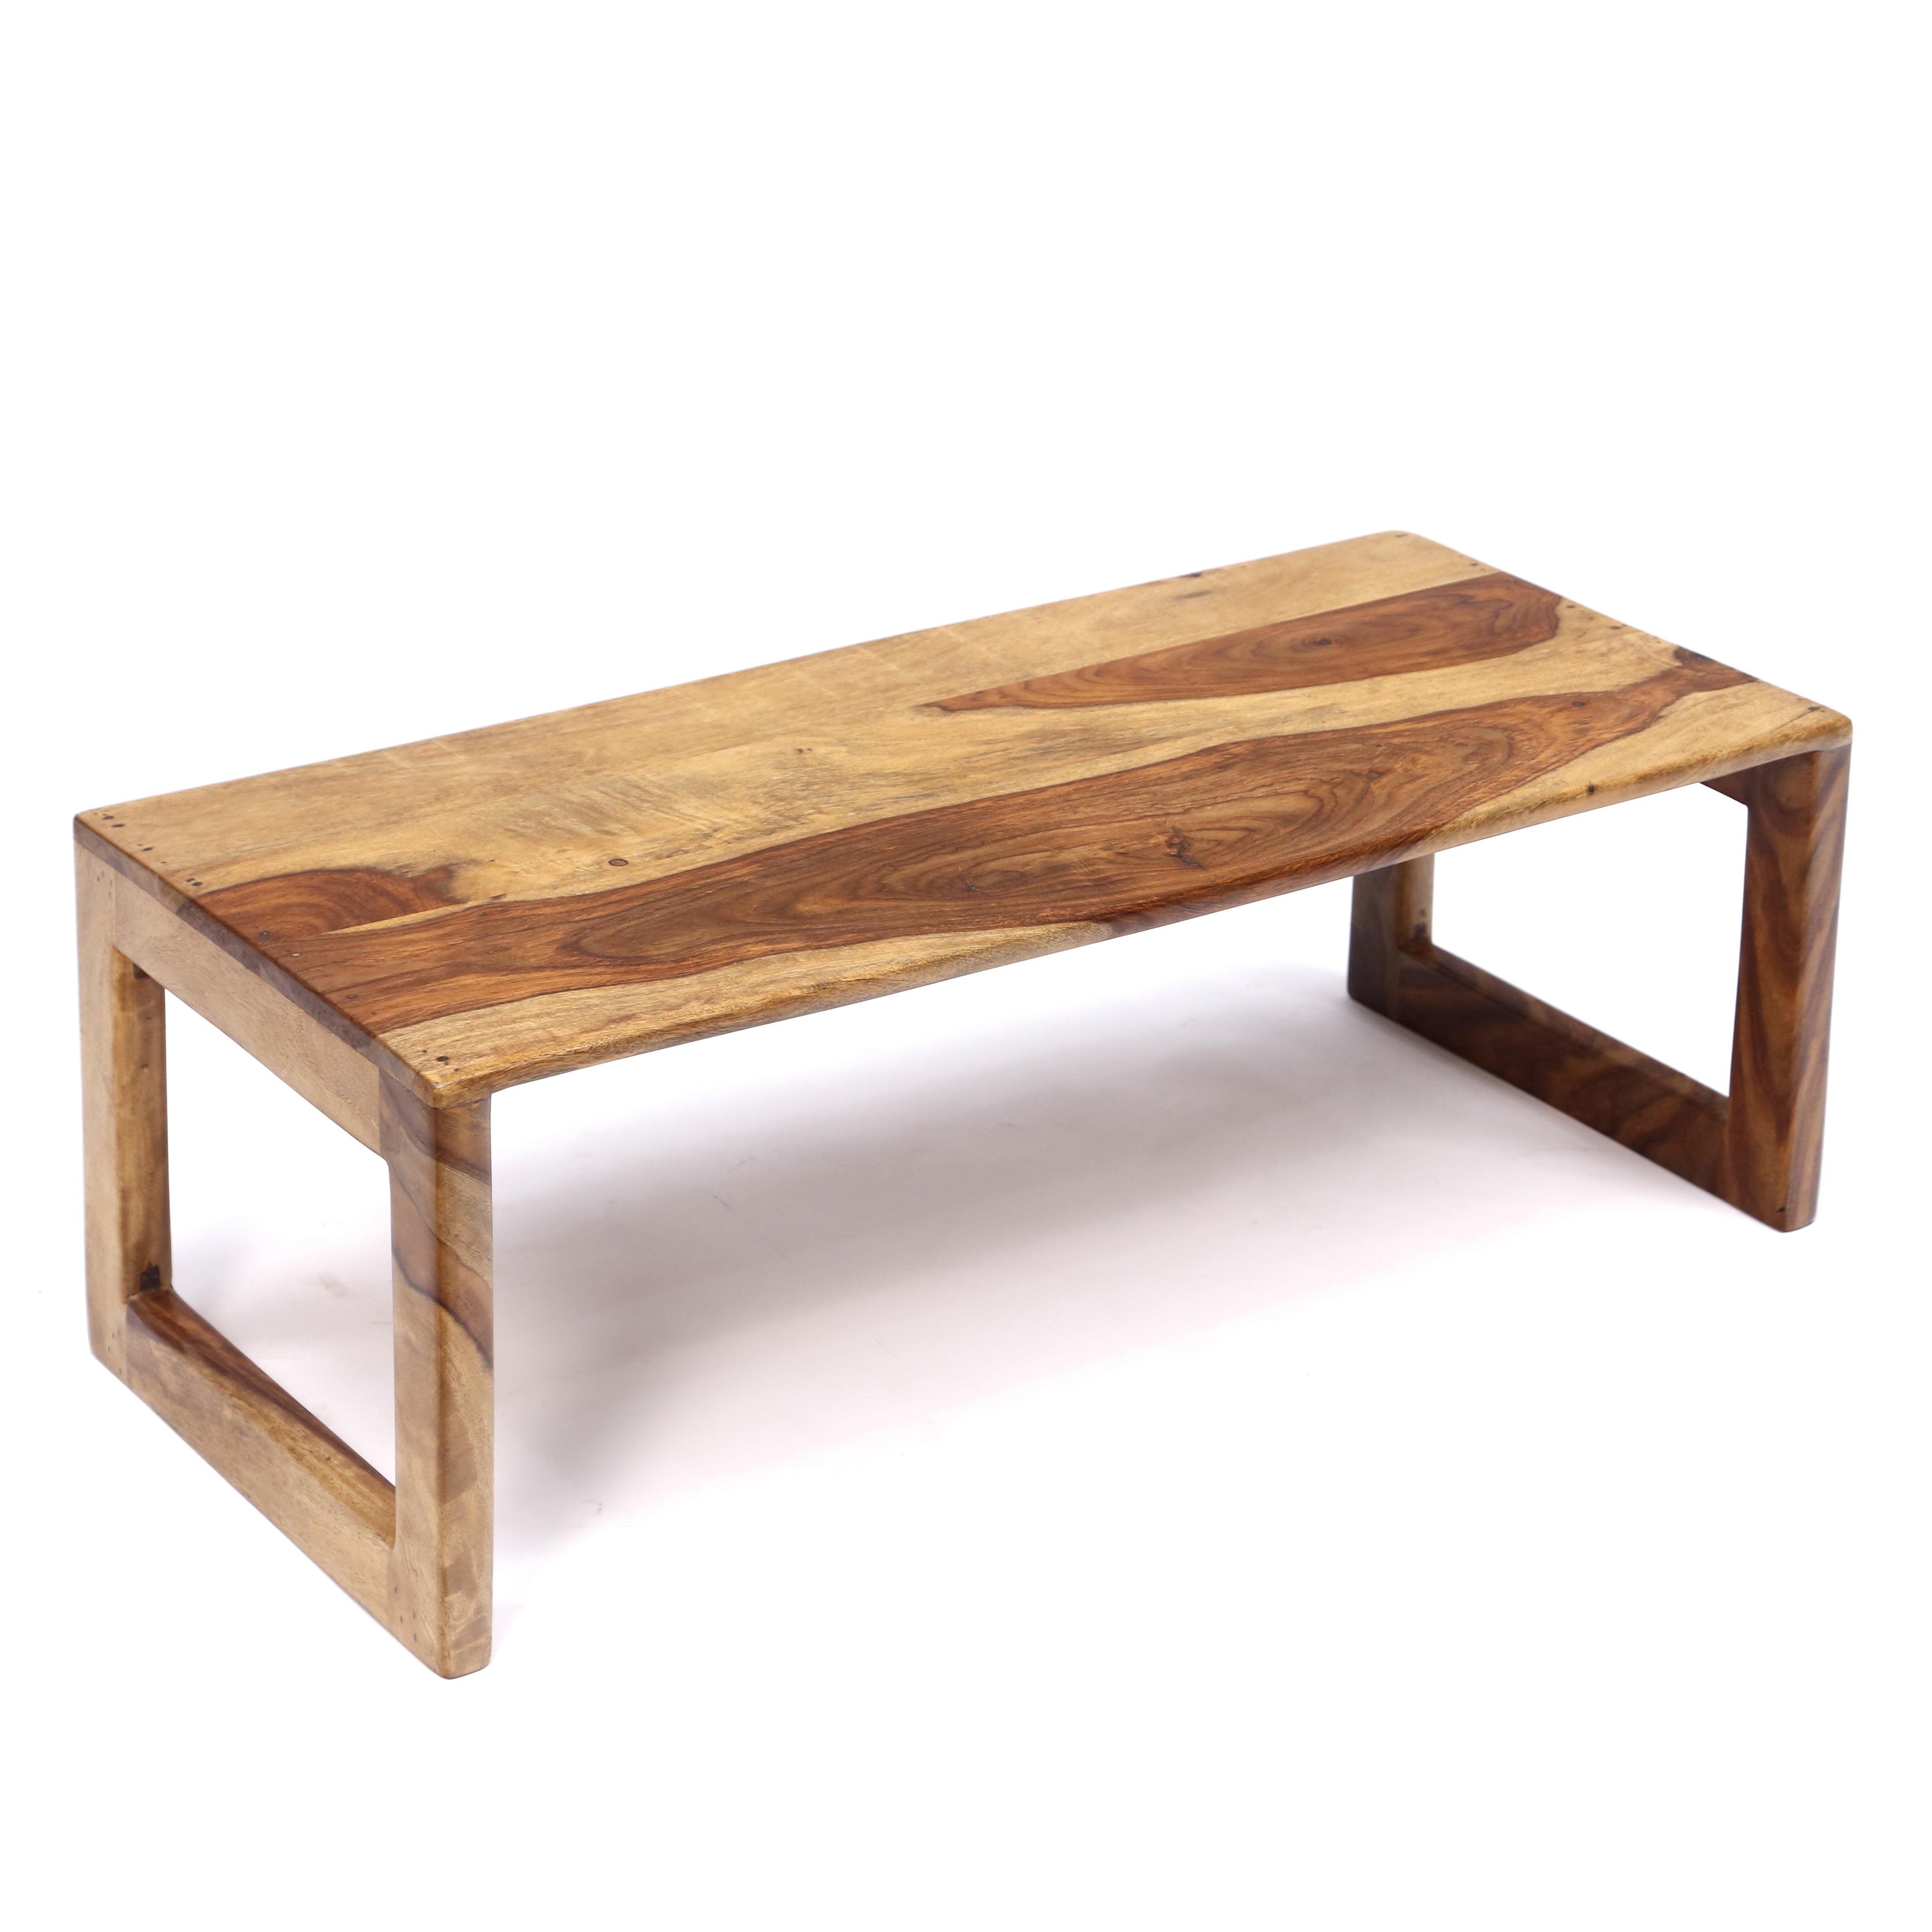 Sheesham wood American Finish Centre Table Coffee Table